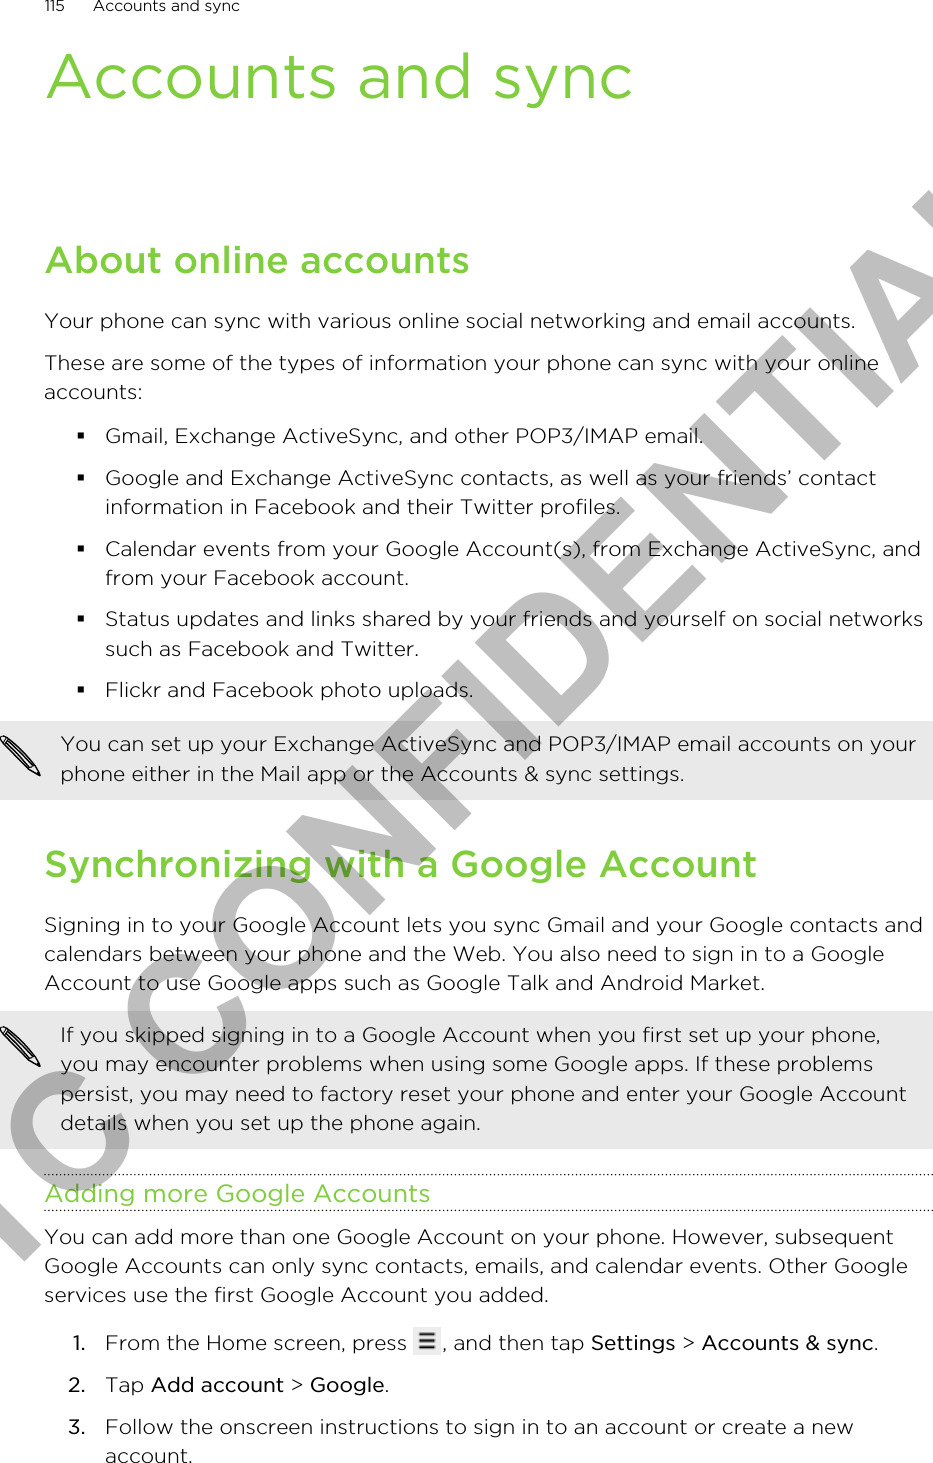 Accounts and syncAbout online accountsYour phone can sync with various online social networking and email accounts.These are some of the types of information your phone can sync with your onlineaccounts:§Gmail, Exchange ActiveSync, and other POP3/IMAP email.§Google and Exchange ActiveSync contacts, as well as your friends’ contactinformation in Facebook and their Twitter profiles.§Calendar events from your Google Account(s), from Exchange ActiveSync, andfrom your Facebook account.§Status updates and links shared by your friends and yourself on social networkssuch as Facebook and Twitter.§Flickr and Facebook photo uploads.You can set up your Exchange ActiveSync and POP3/IMAP email accounts on yourphone either in the Mail app or the Accounts &amp; sync settings.Synchronizing with a Google AccountSigning in to your Google Account lets you sync Gmail and your Google contacts andcalendars between your phone and the Web. You also need to sign in to a GoogleAccount to use Google apps such as Google Talk and Android Market.If you skipped signing in to a Google Account when you first set up your phone,you may encounter problems when using some Google apps. If these problemspersist, you may need to factory reset your phone and enter your Google Accountdetails when you set up the phone again.Adding more Google AccountsYou can add more than one Google Account on your phone. However, subsequentGoogle Accounts can only sync contacts, emails, and calendar events. Other Googleservices use the first Google Account you added.1. From the Home screen, press  , and then tap Settings &gt; Accounts &amp; sync.2. Tap Add account &gt; Google.3. Follow the onscreen instructions to sign in to an account or create a newaccount.115 Accounts and syncHTC CONFIDENTIAL